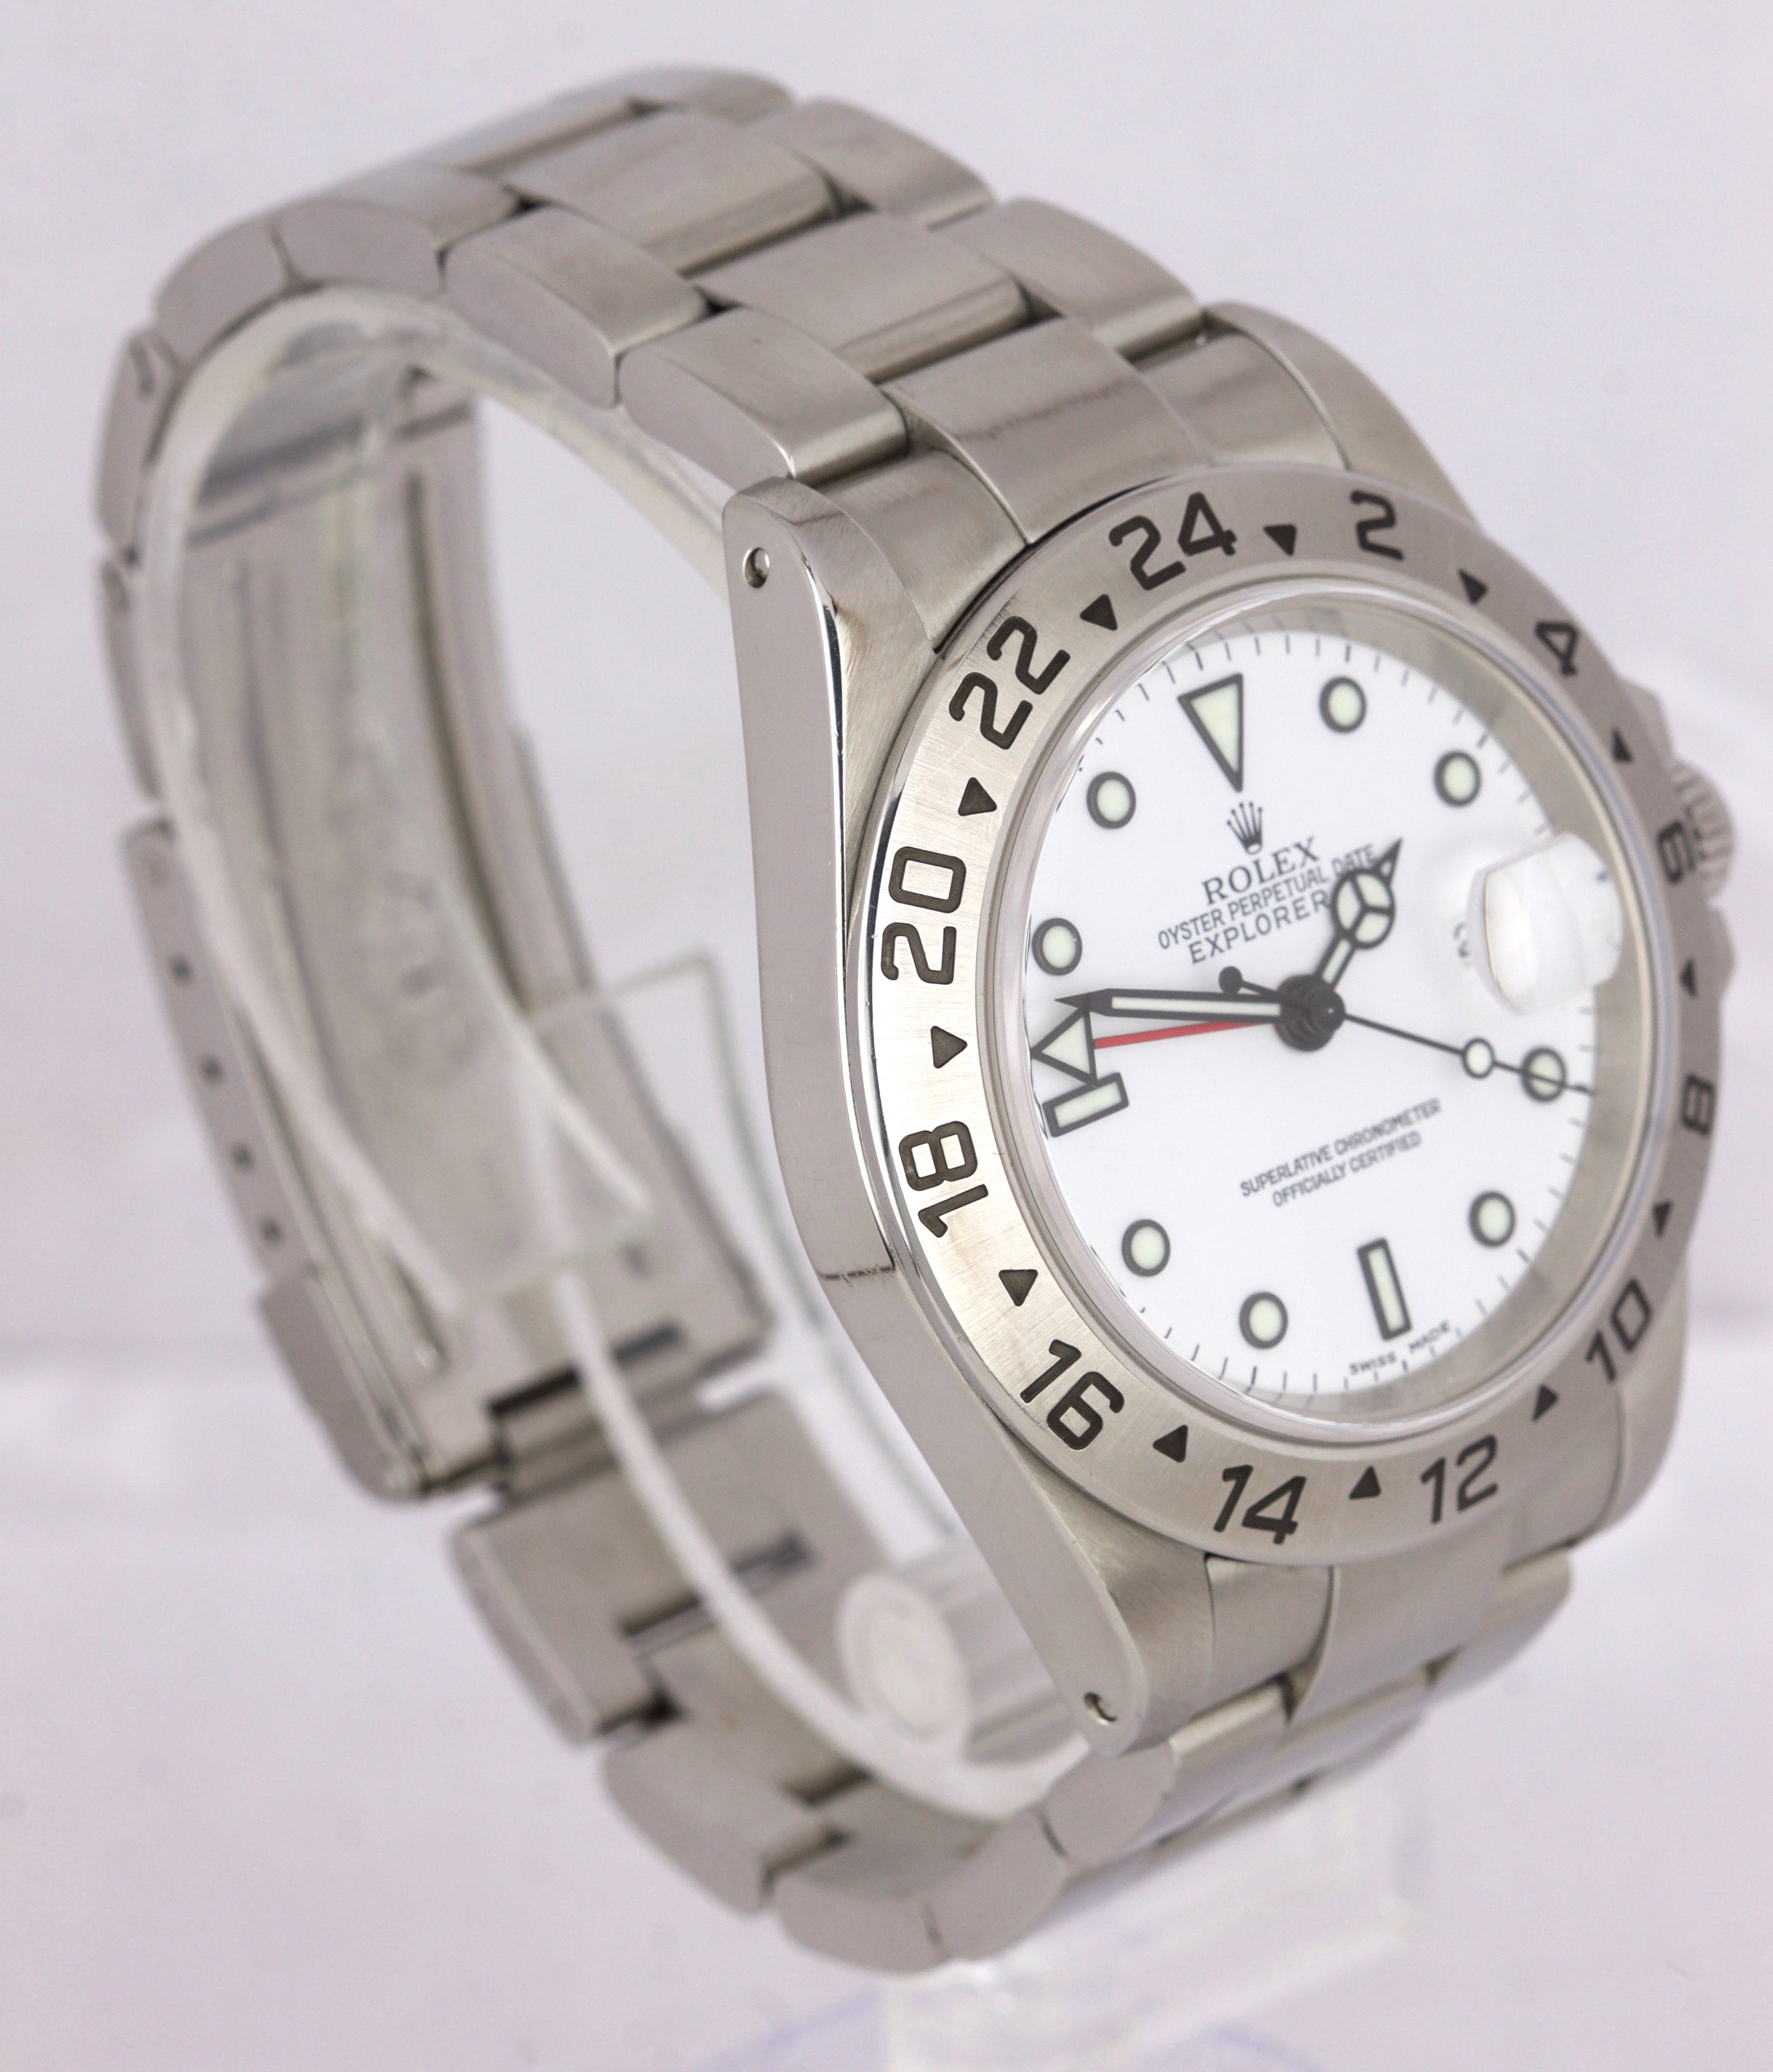 2003 UNPOLISHED Rolex Explorer II PUNCHED PAPERS Polar White GMT SEL 16570 Watch